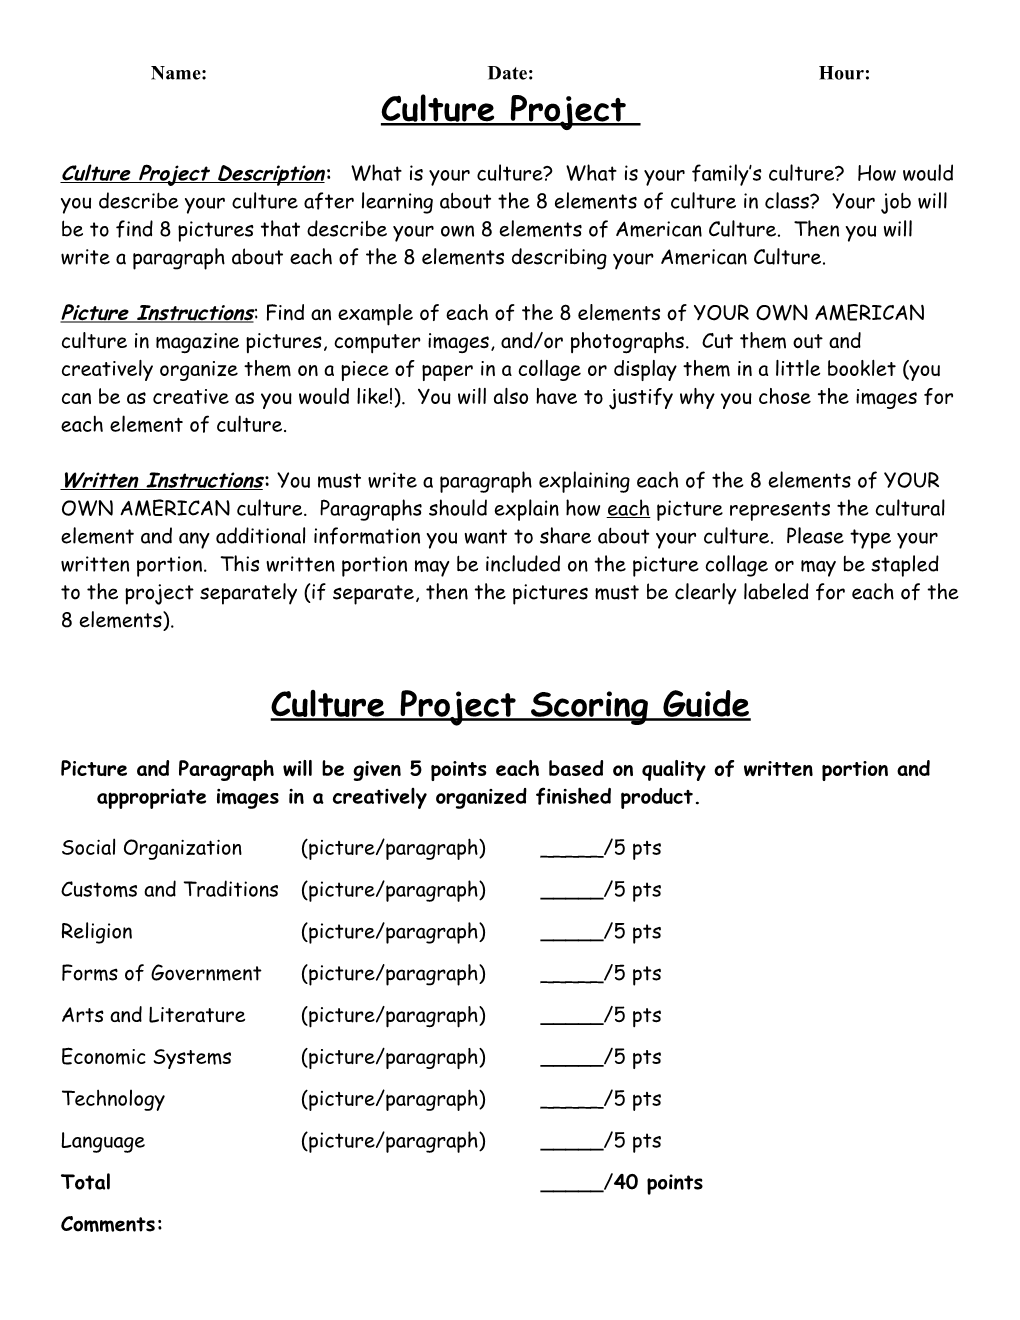 Culture Collage Project Written Portion Instructions